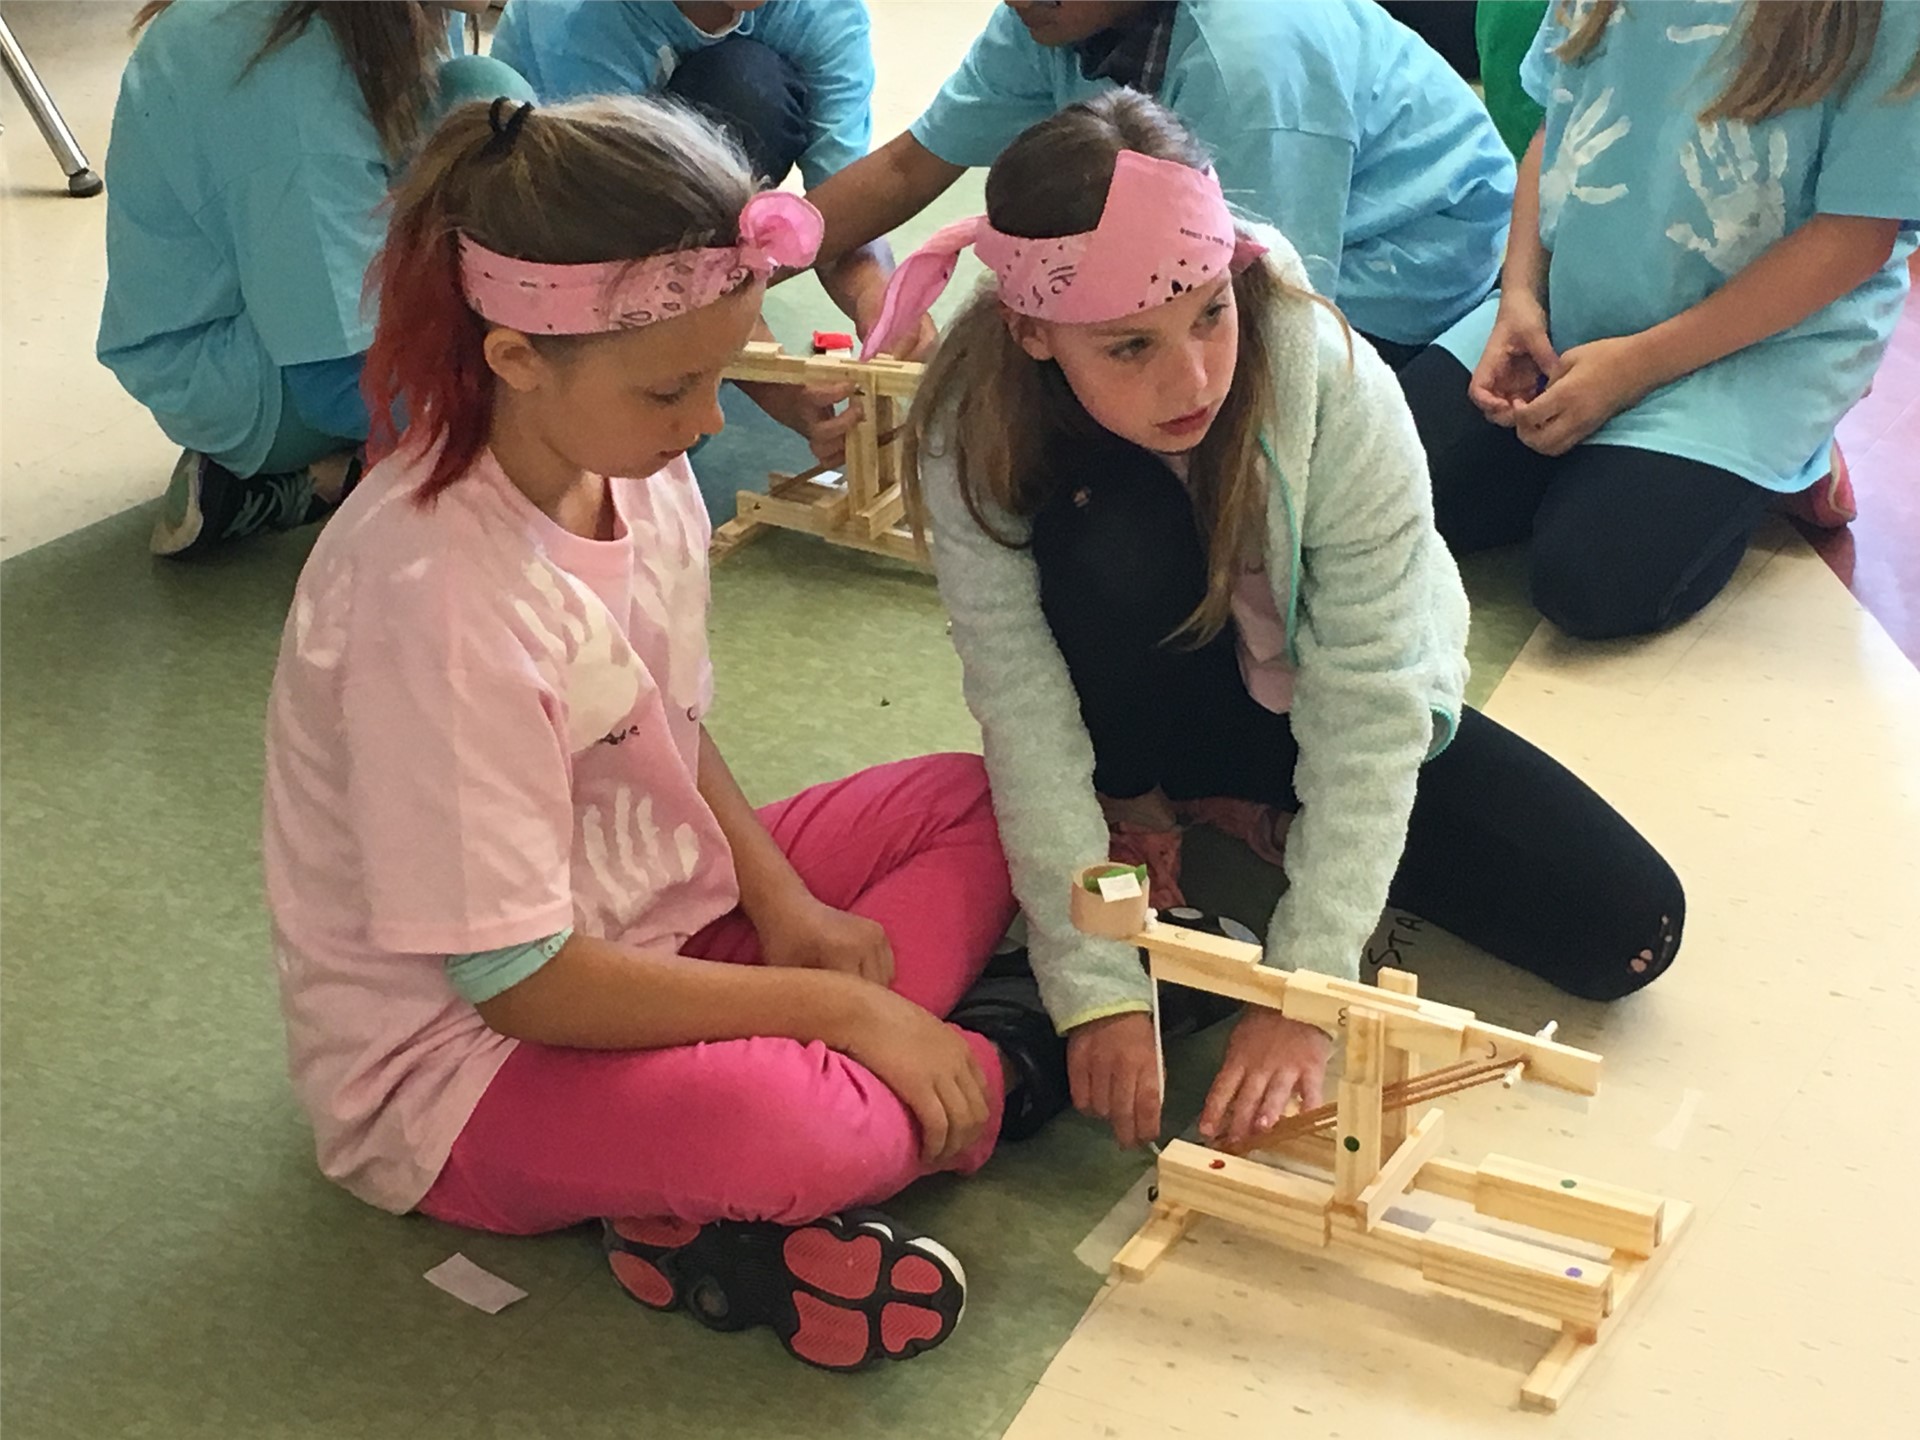 Science Olympiad group activities